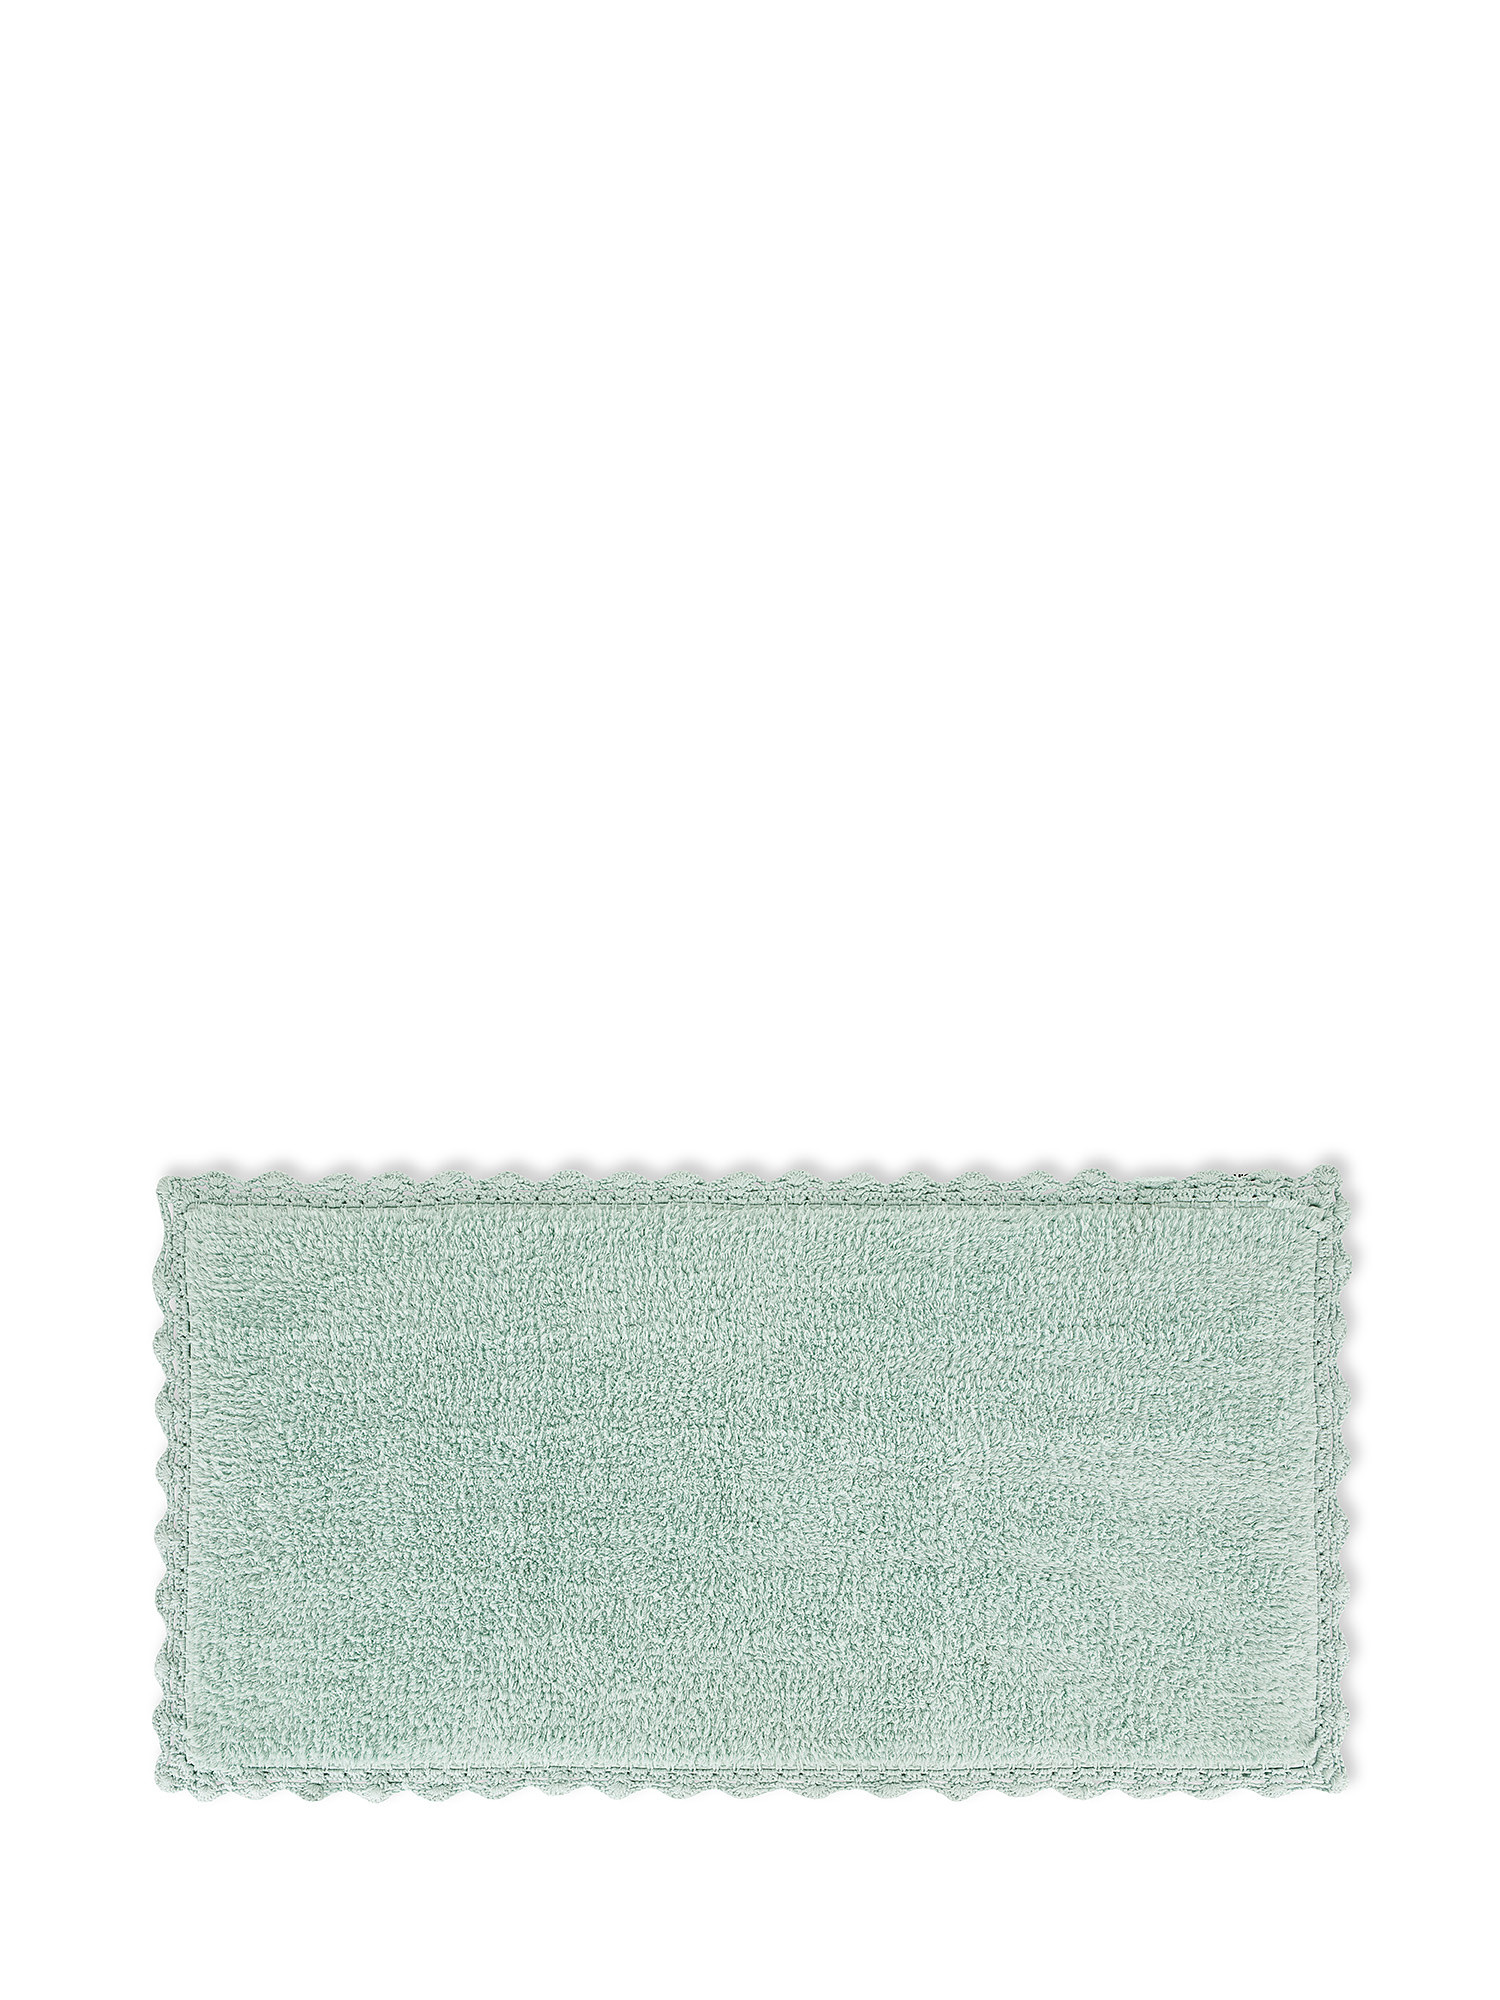 Cotton bath mat with crochet border, Sage Green, large image number 0